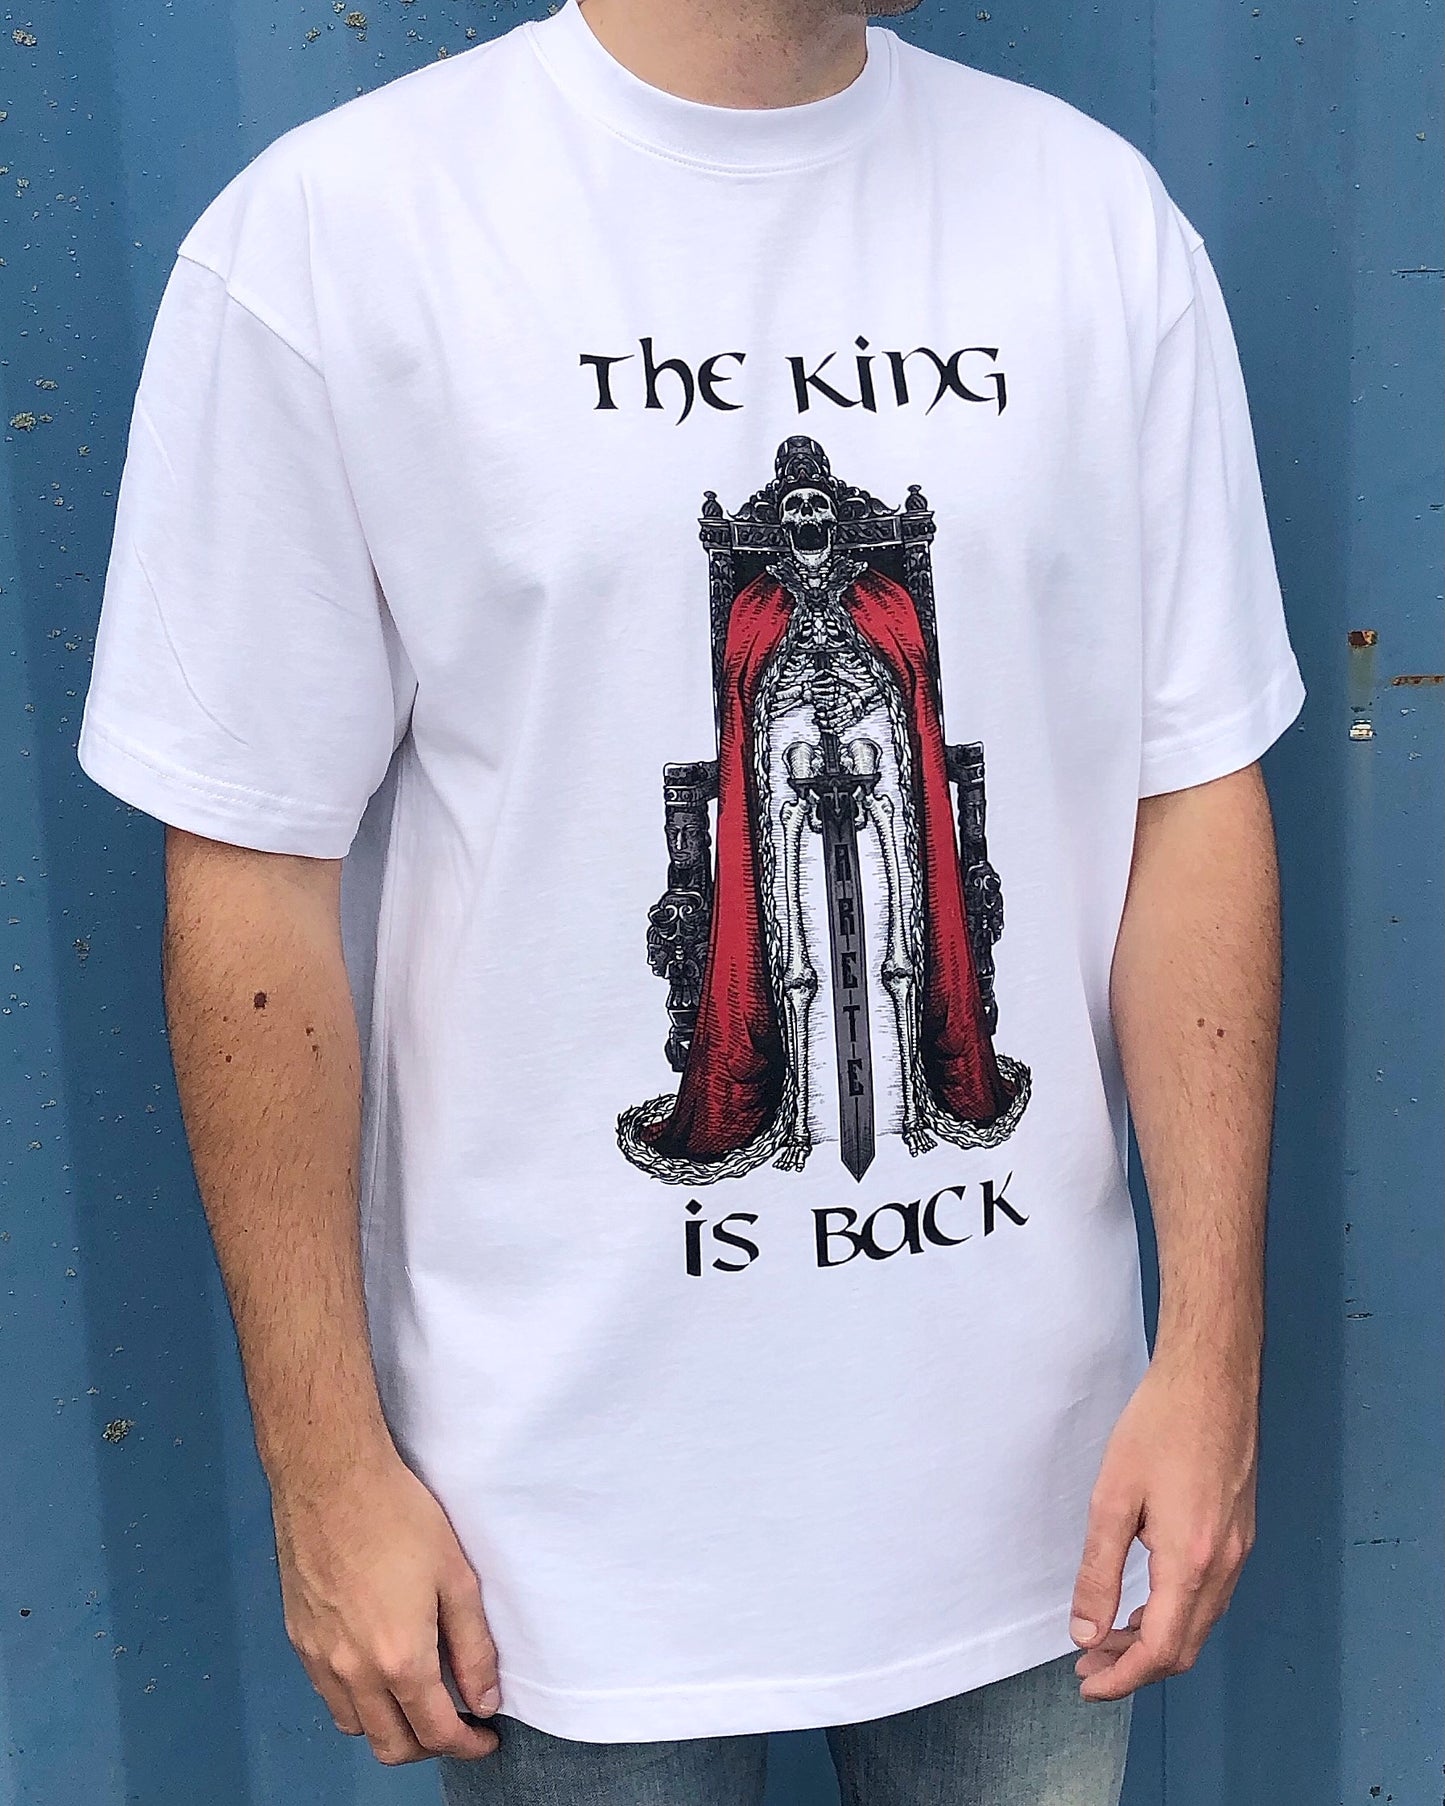 'THE KING IS BACK' T-shirt | White - ARETE